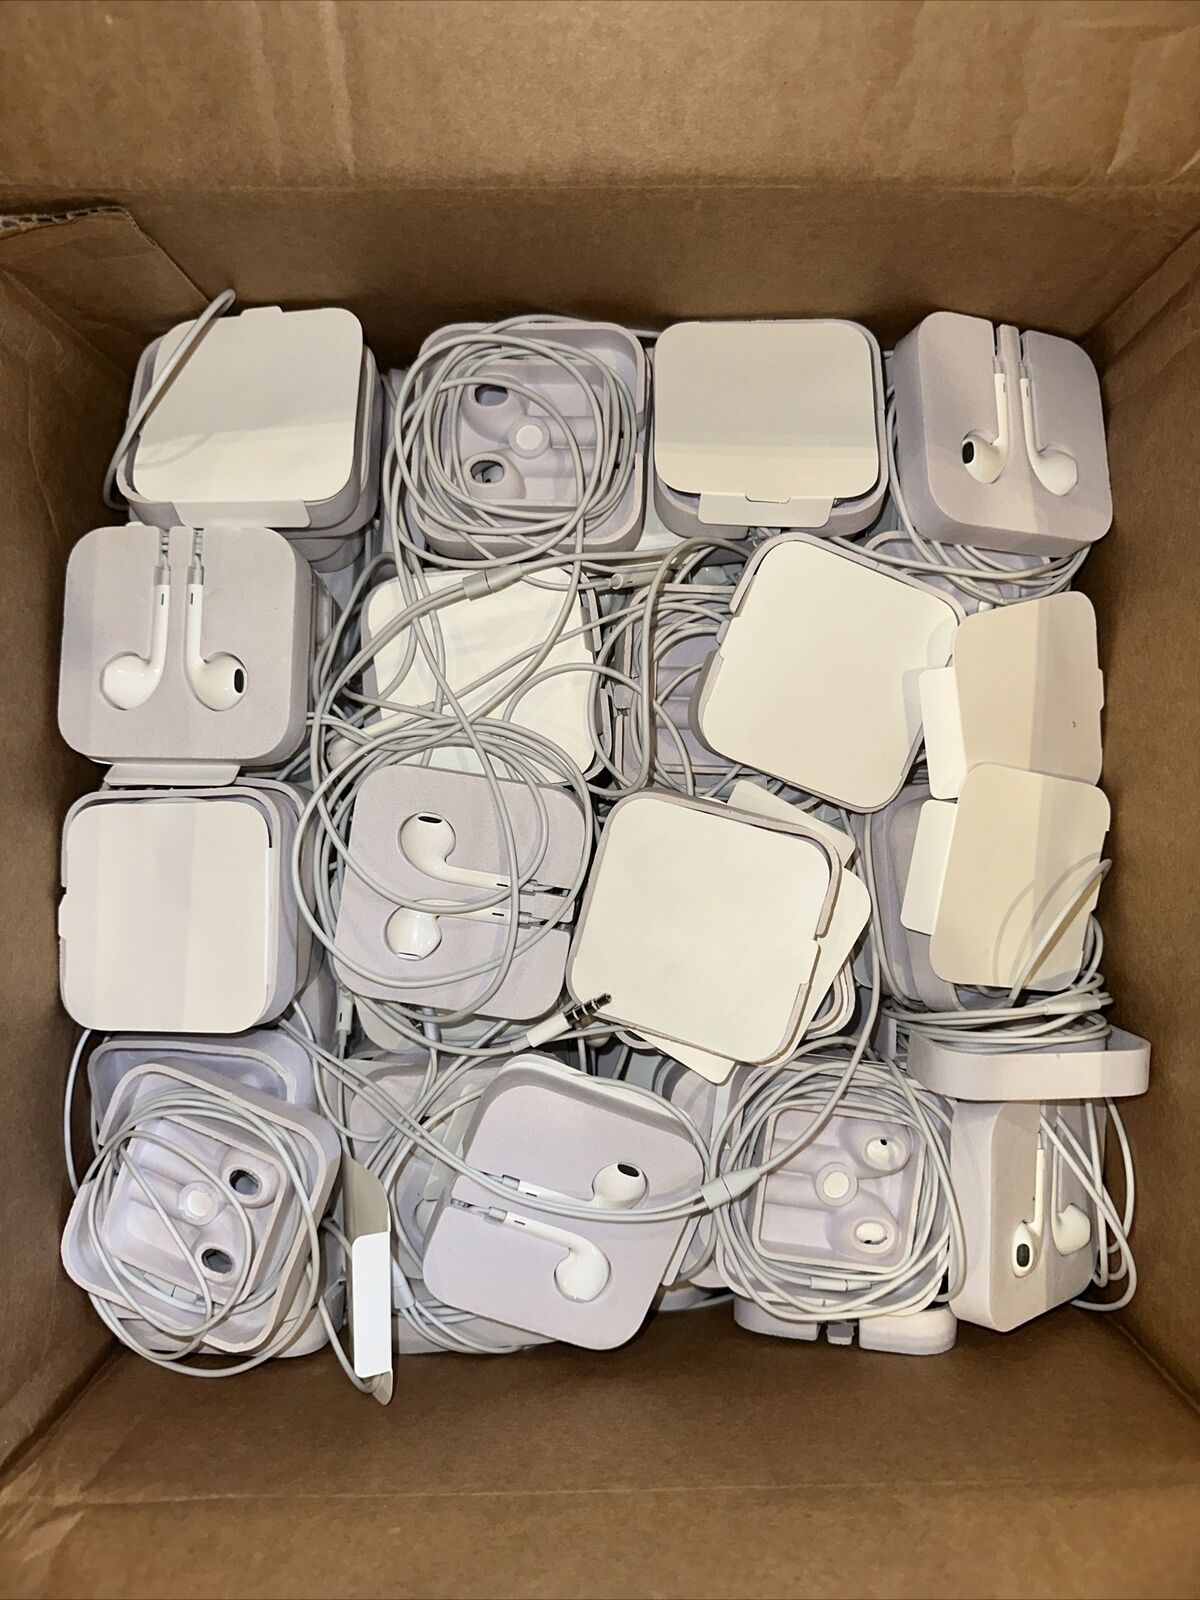 LOT OF 3000 OEM GENUINE Apple Wired Stereo Headphone Jack Ear Buds NEW OPEN BOX